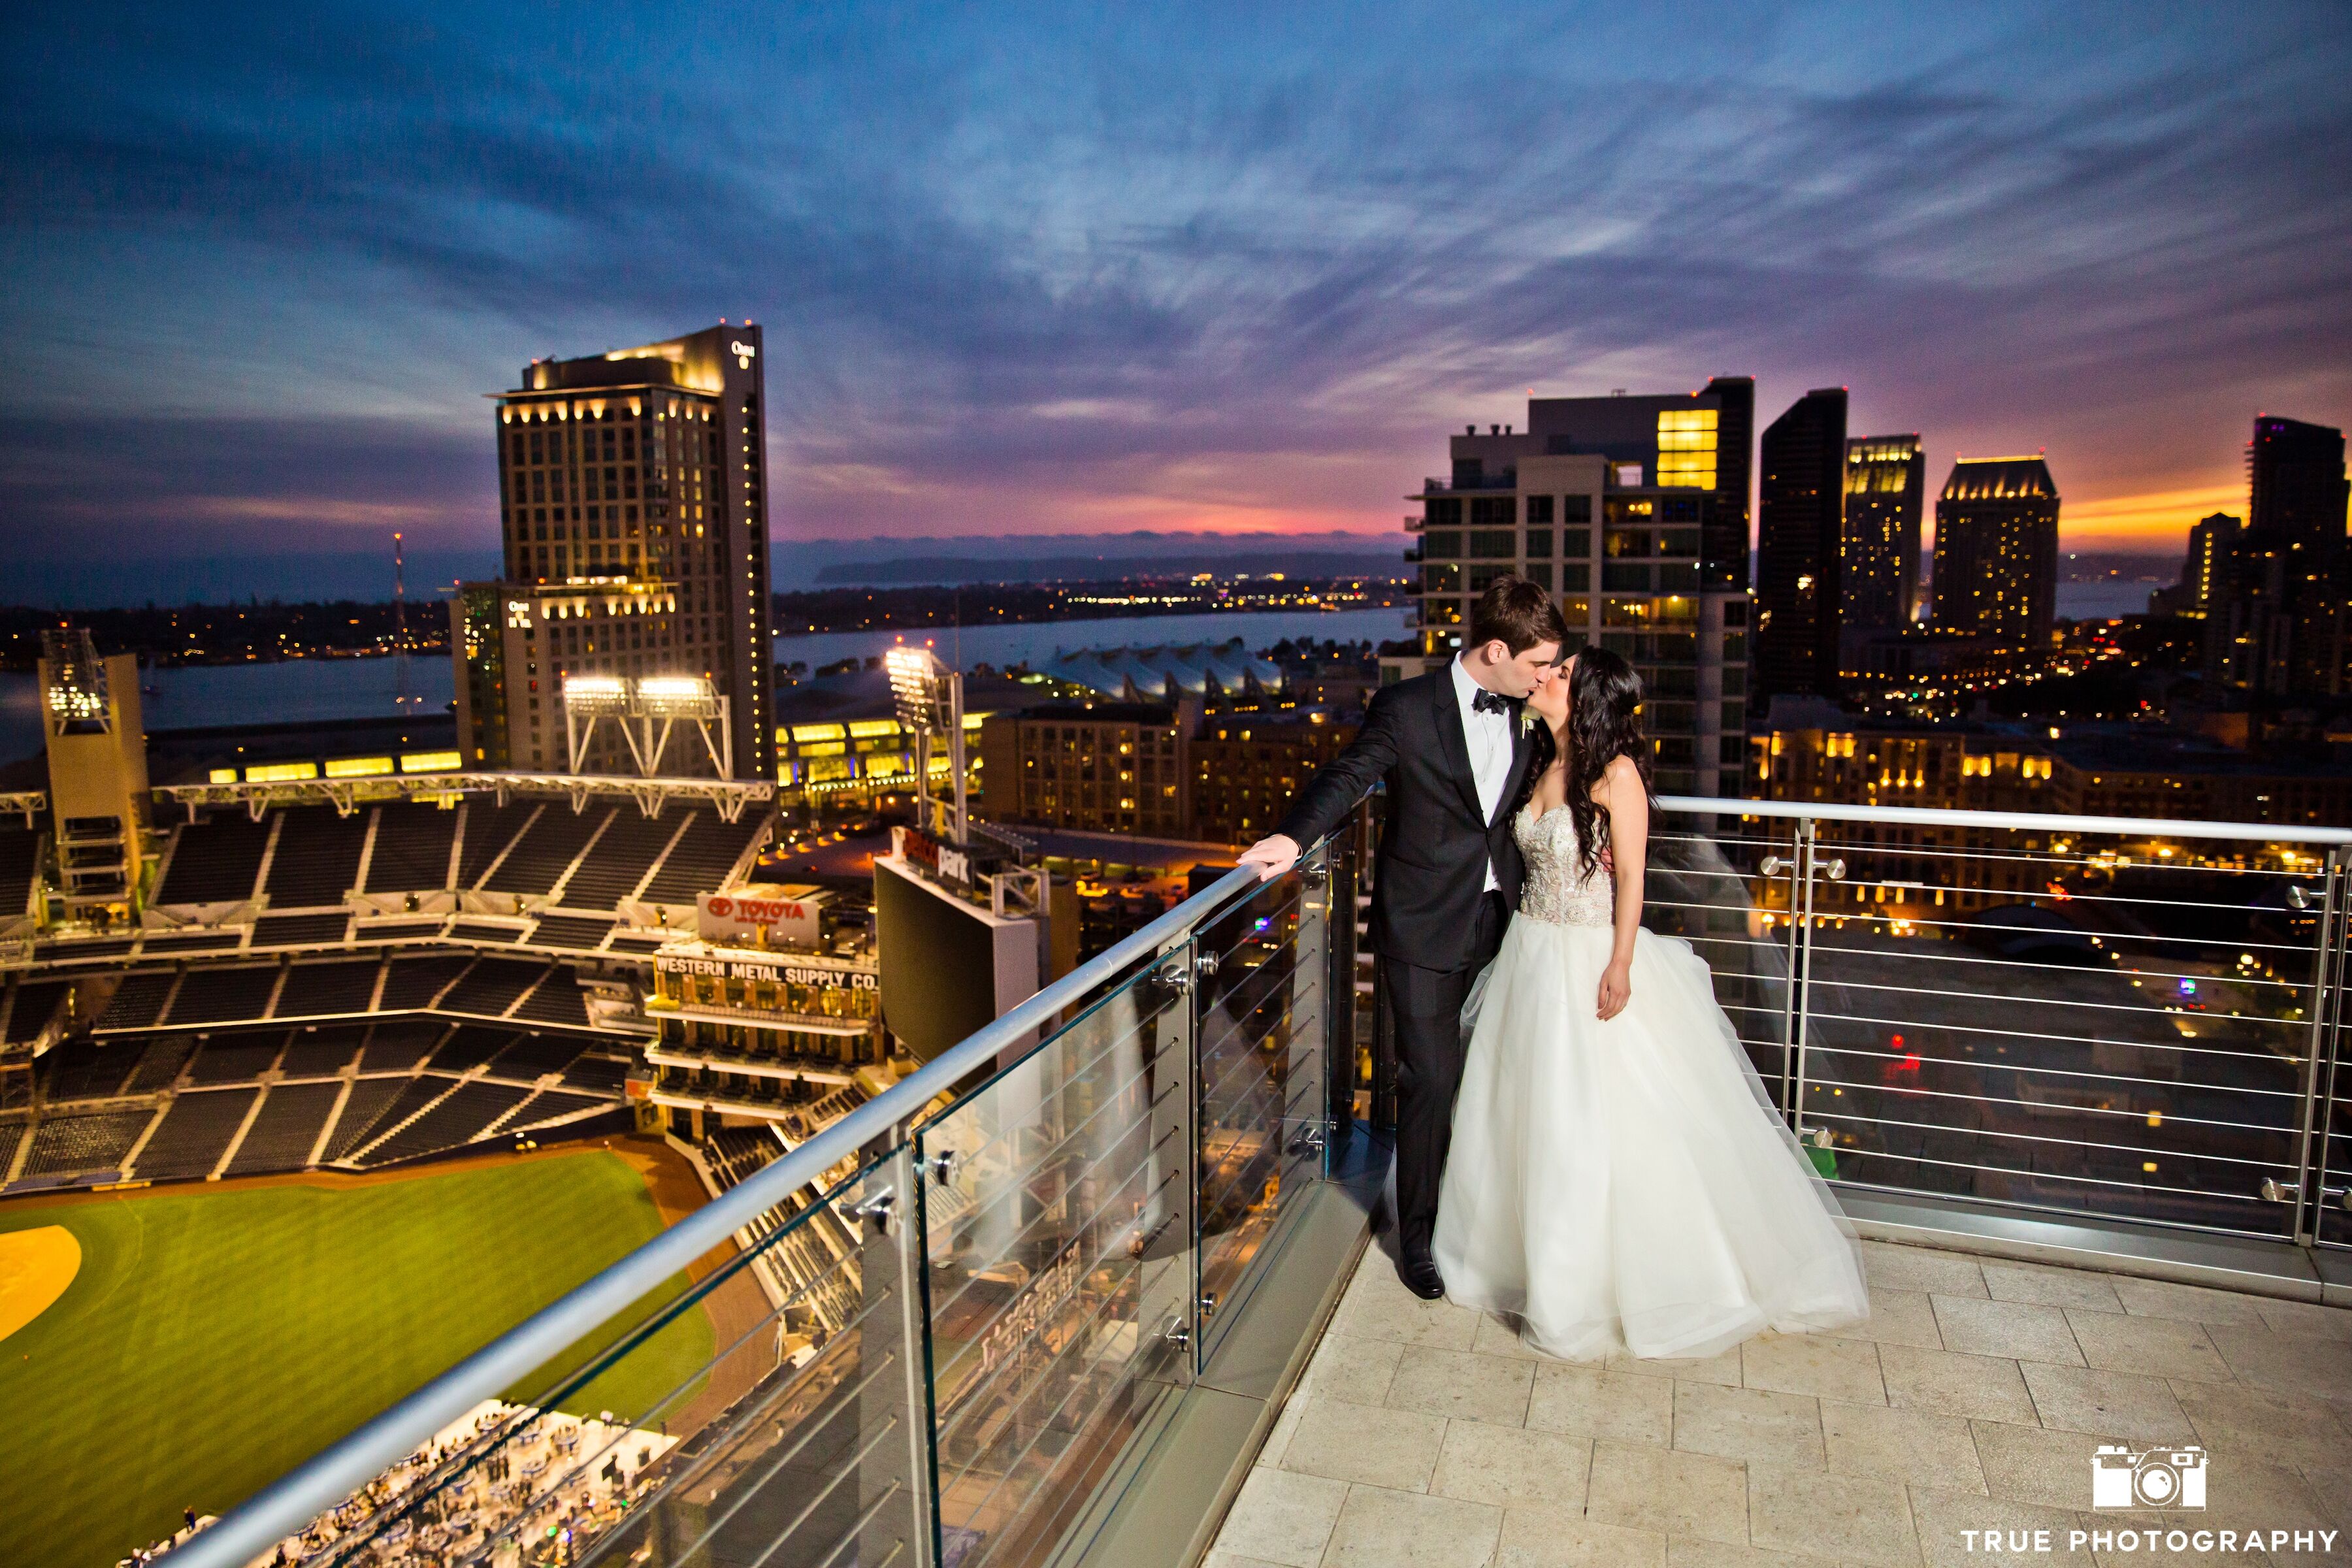 The Ultimate Skybox | Reception Venues - San Diego, CA